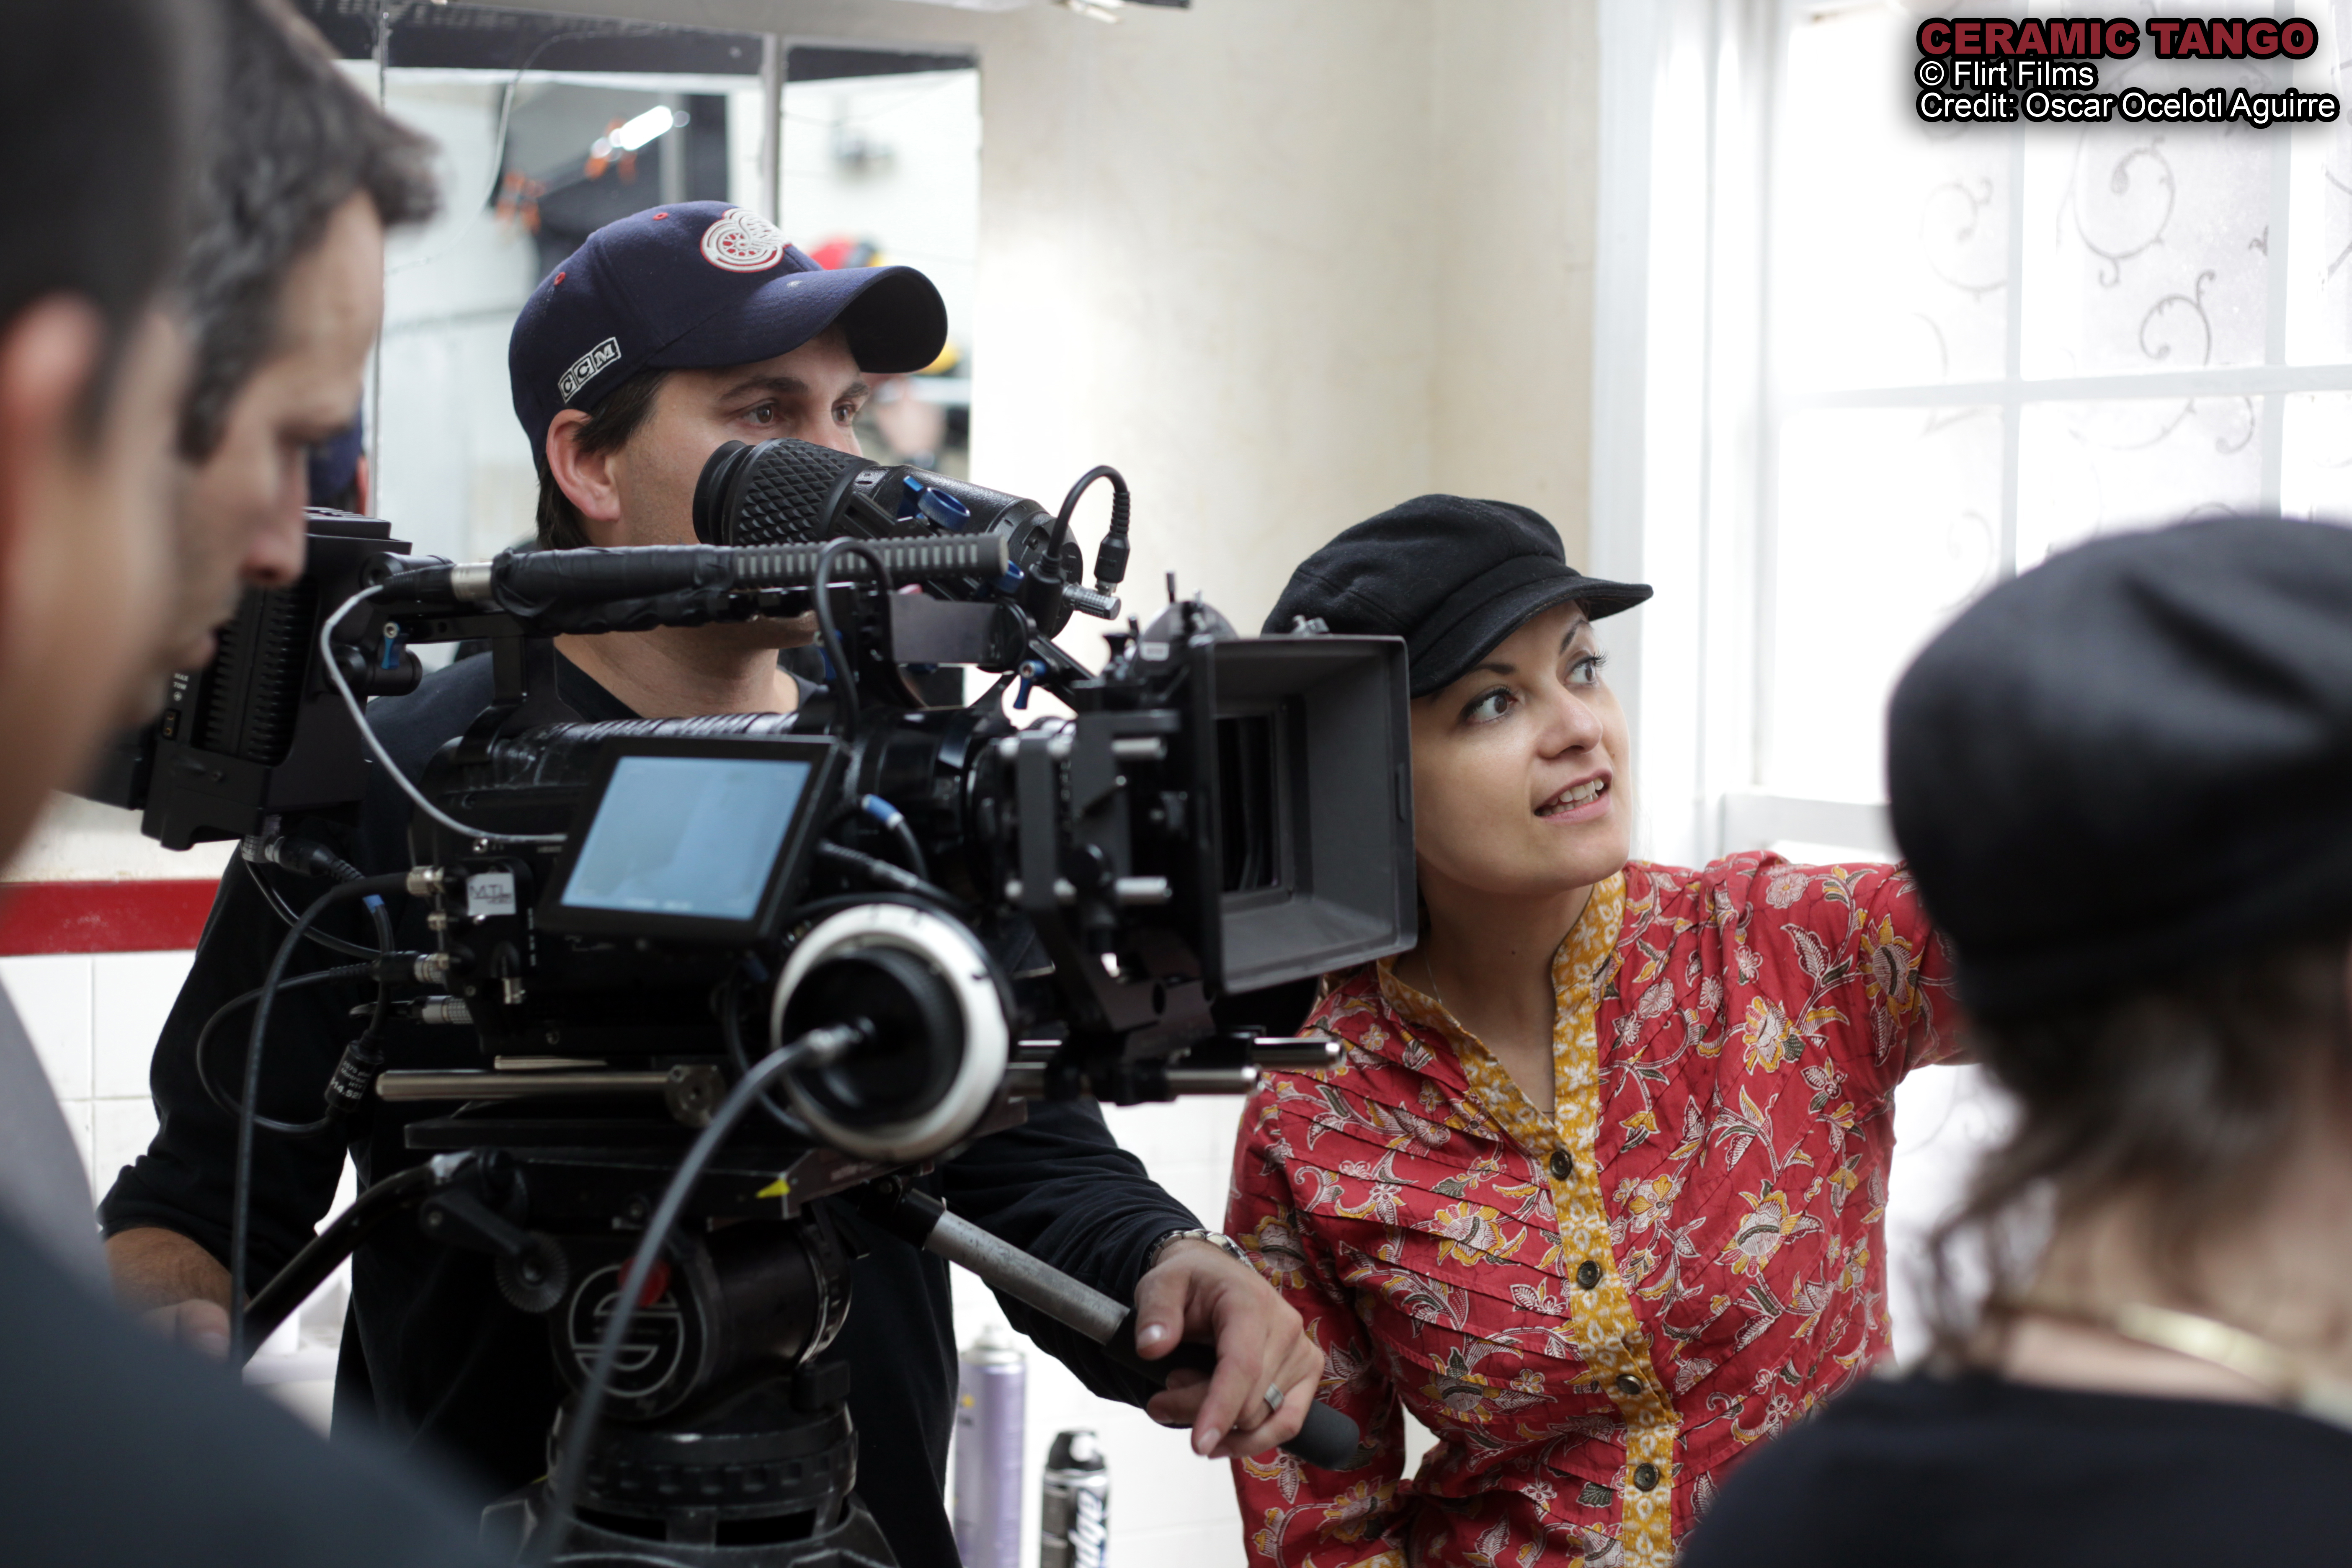 Director Patricia Chica and crew, on the set of CERAMIC TANGO.